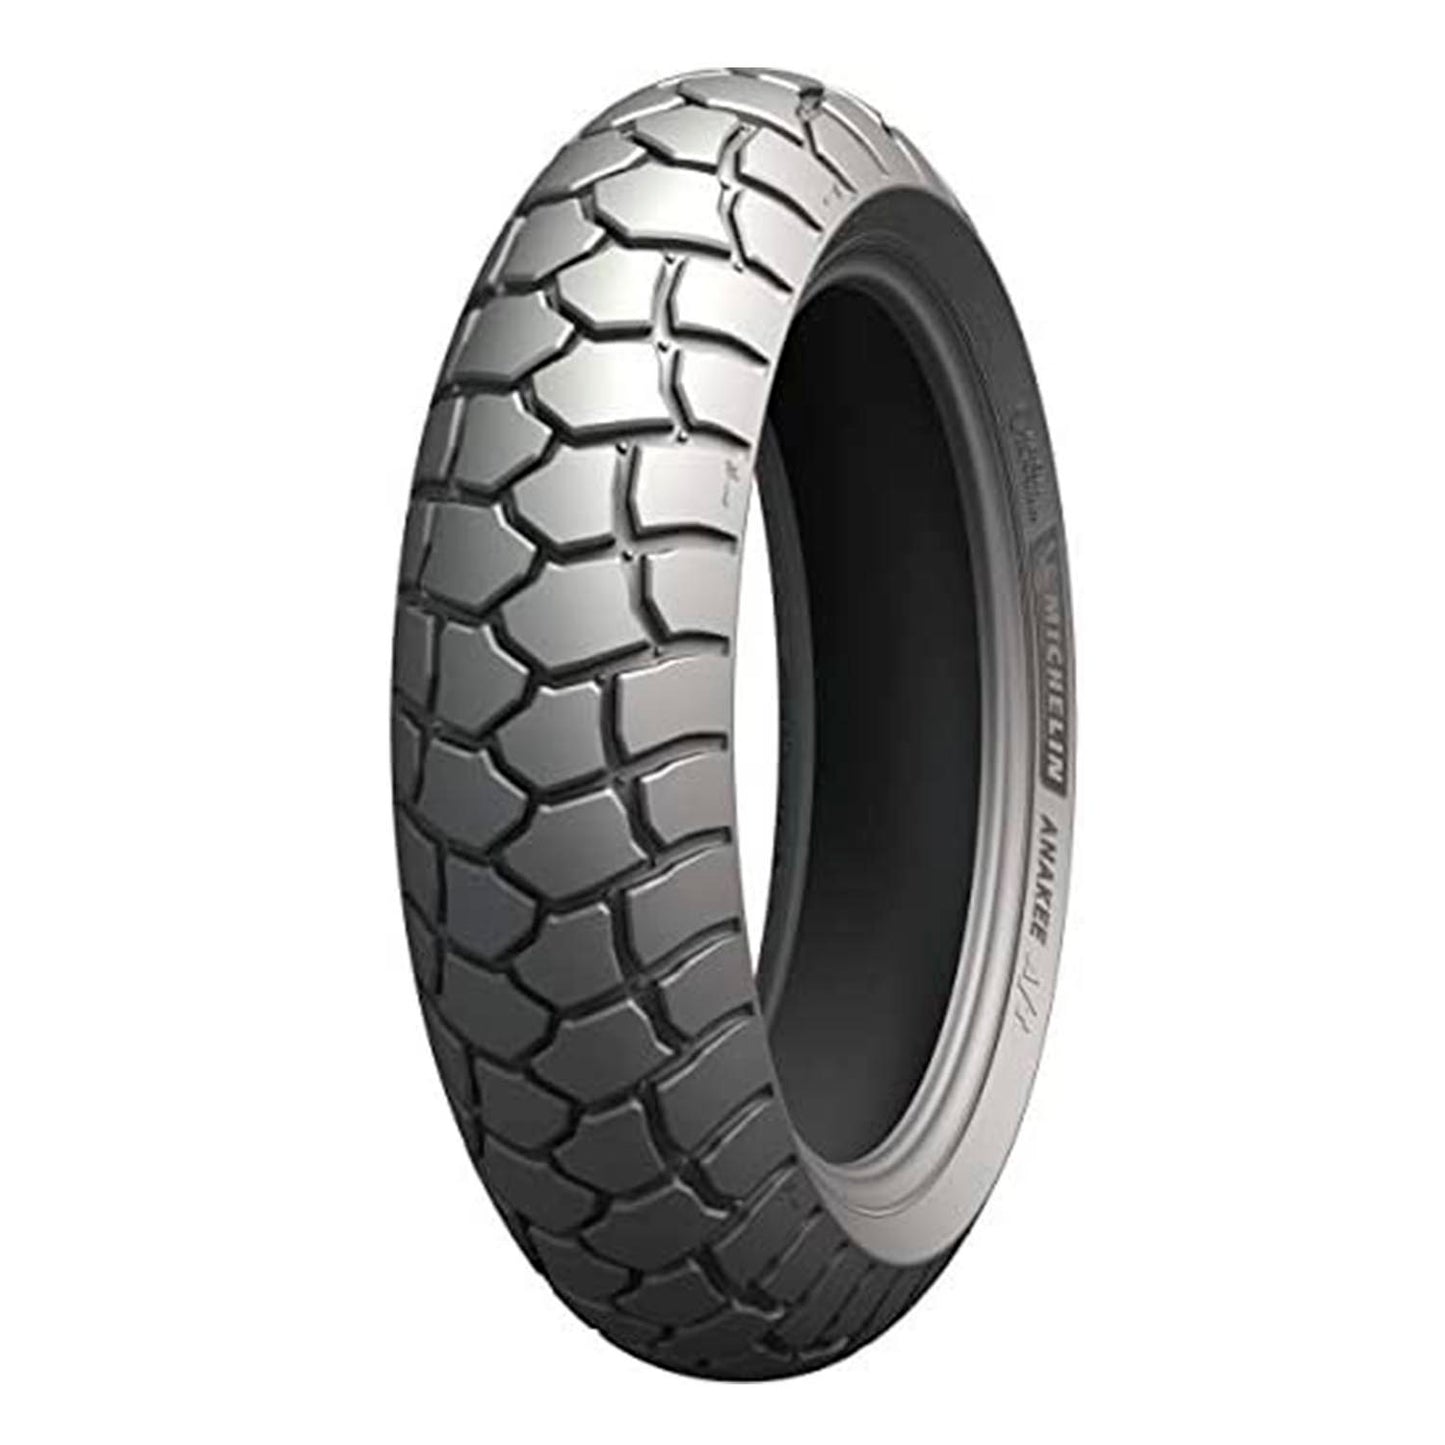 CAUCHO MICHELIN MOTO 130/80-17 M/C 71T REINF MST ANAKEE STREE